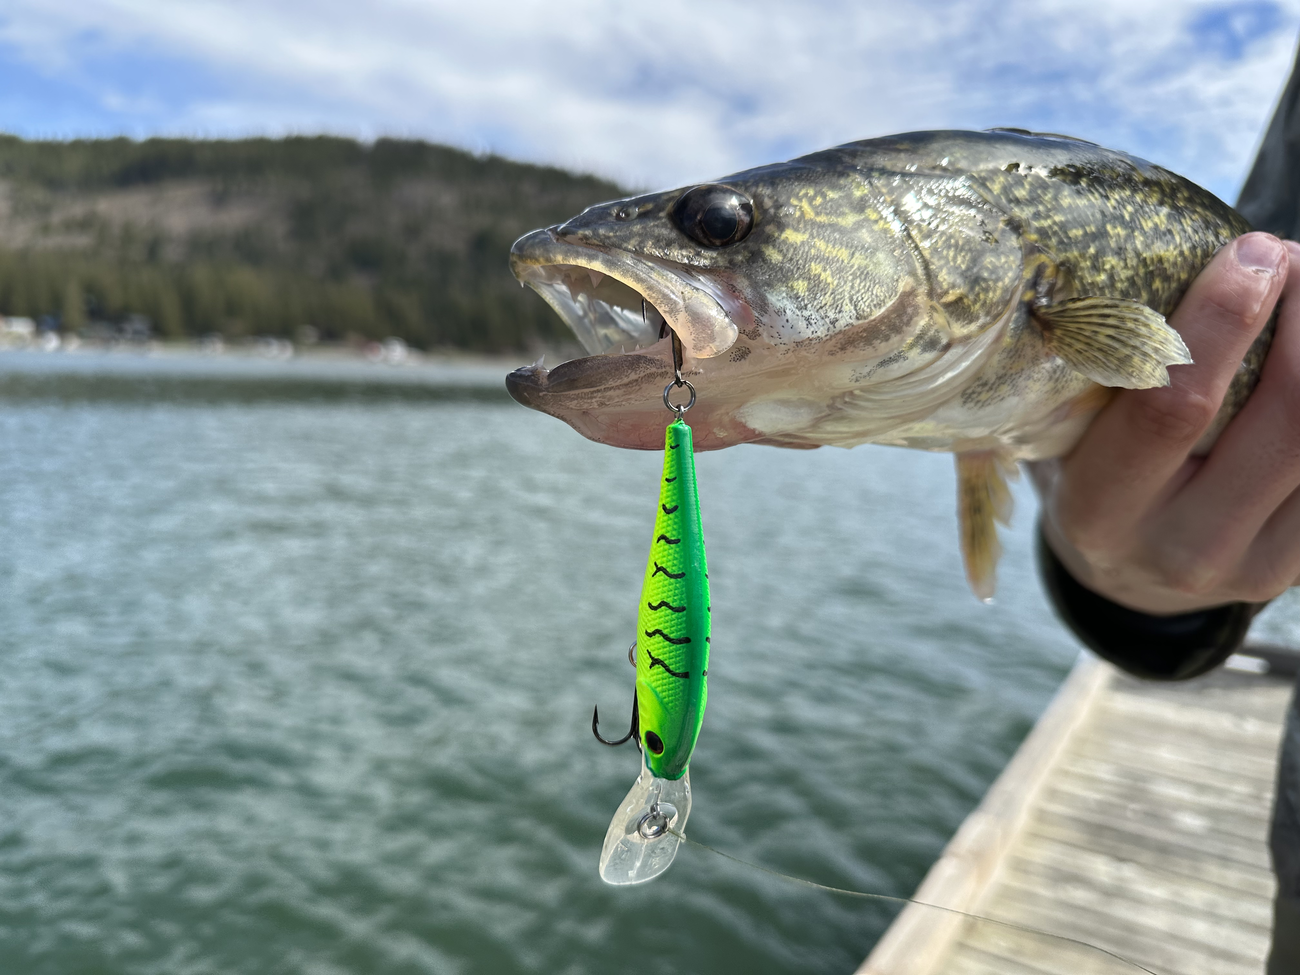 Walleye caught by a fisherman with a crankbait in Lake Pend Oreille